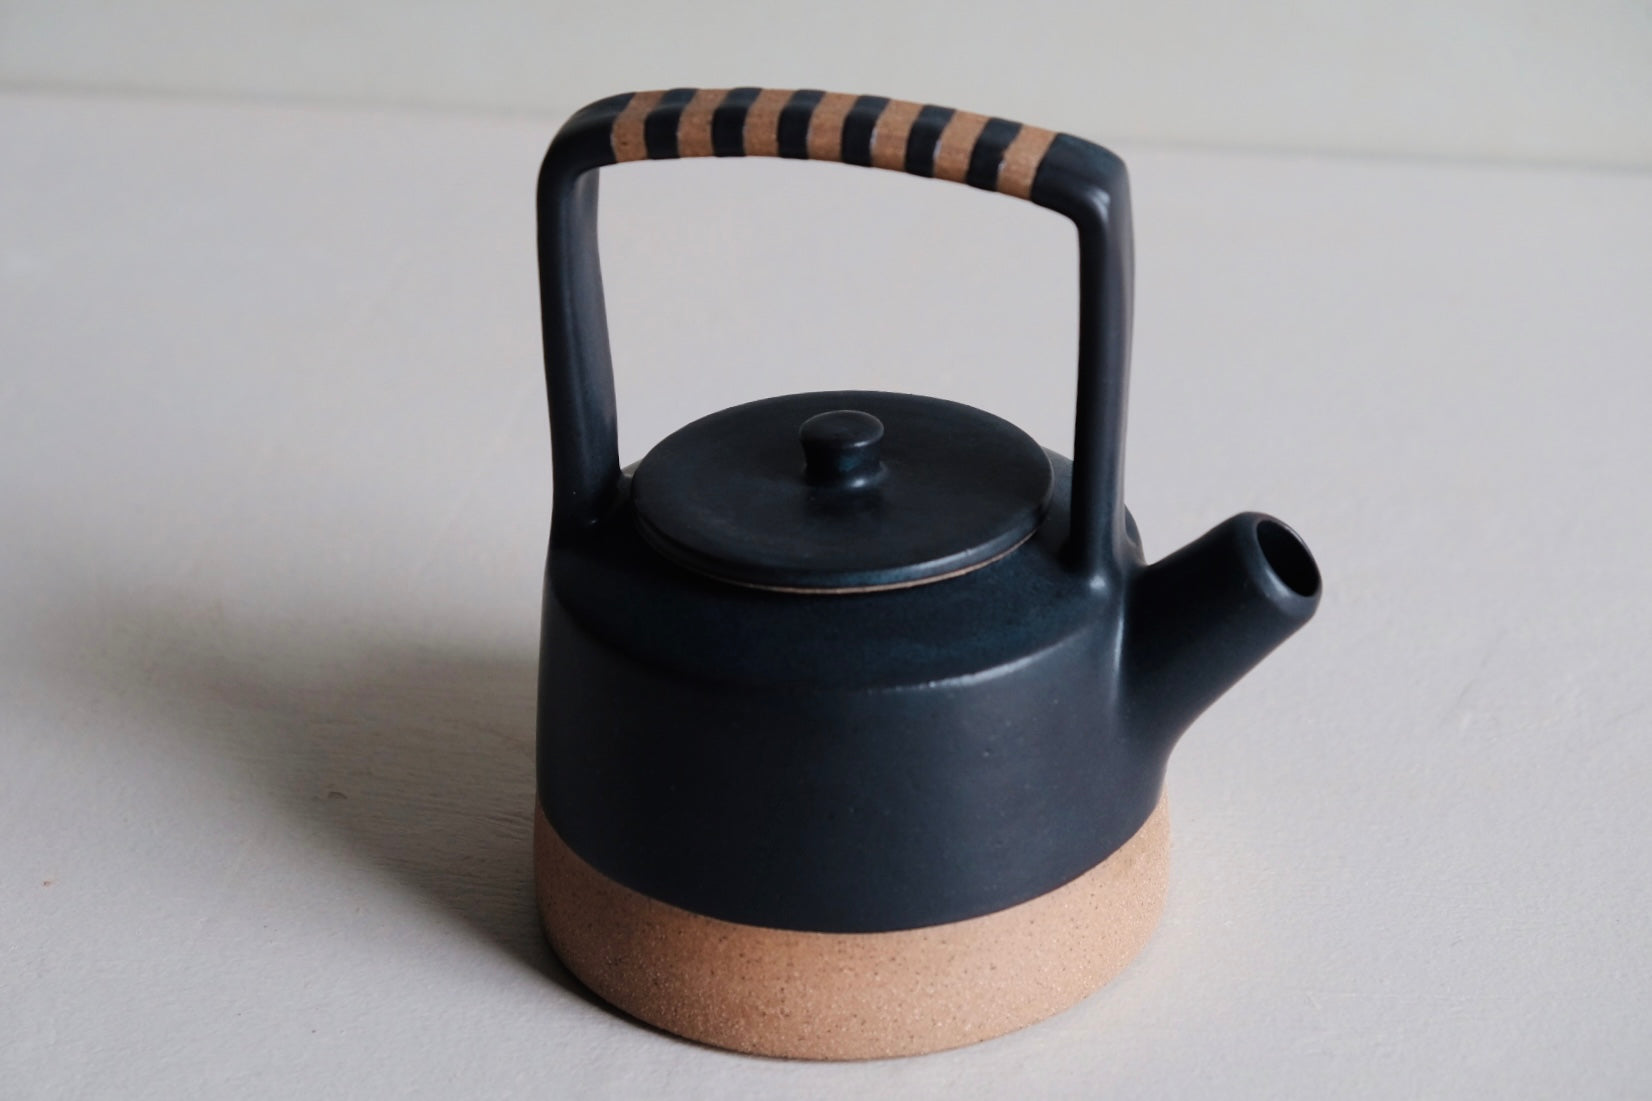 Black and White Stout Tea Kettle with Iron Handle